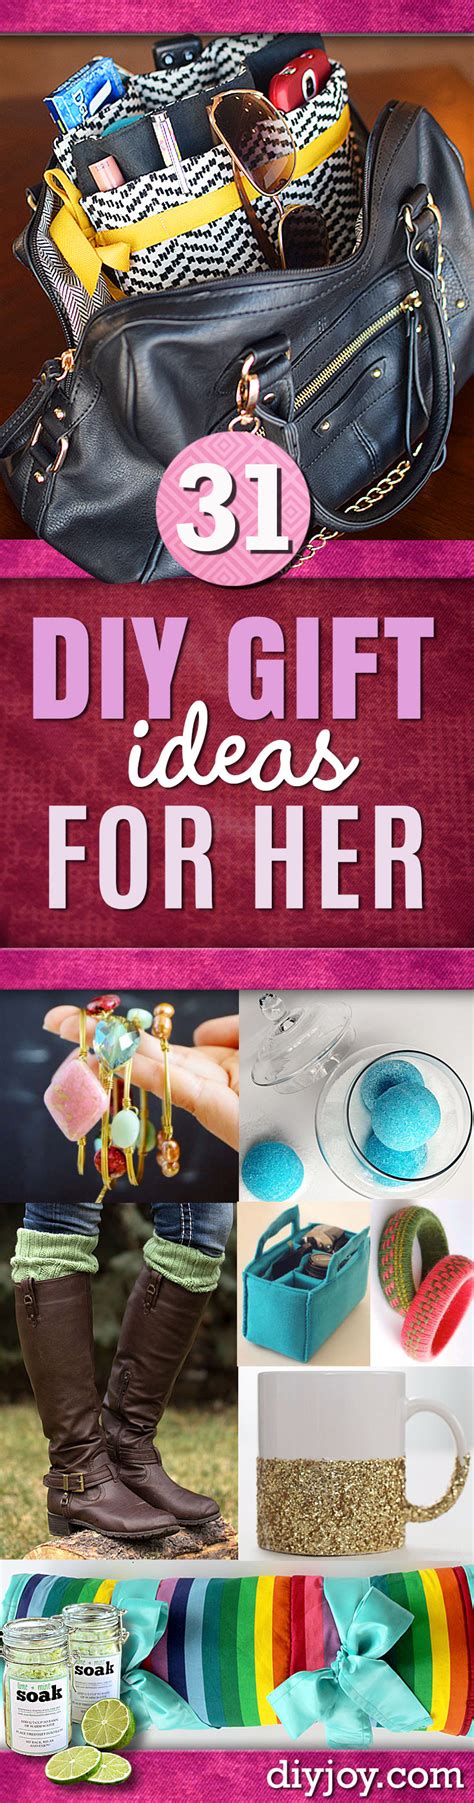 Even if you waited until the last minute and have no money, she'll adore a homemade gift from her mom won't even be able to tell you waited until the last minute thanks to these thoughtful homemade gifts. DIY Gift Ideas for Her